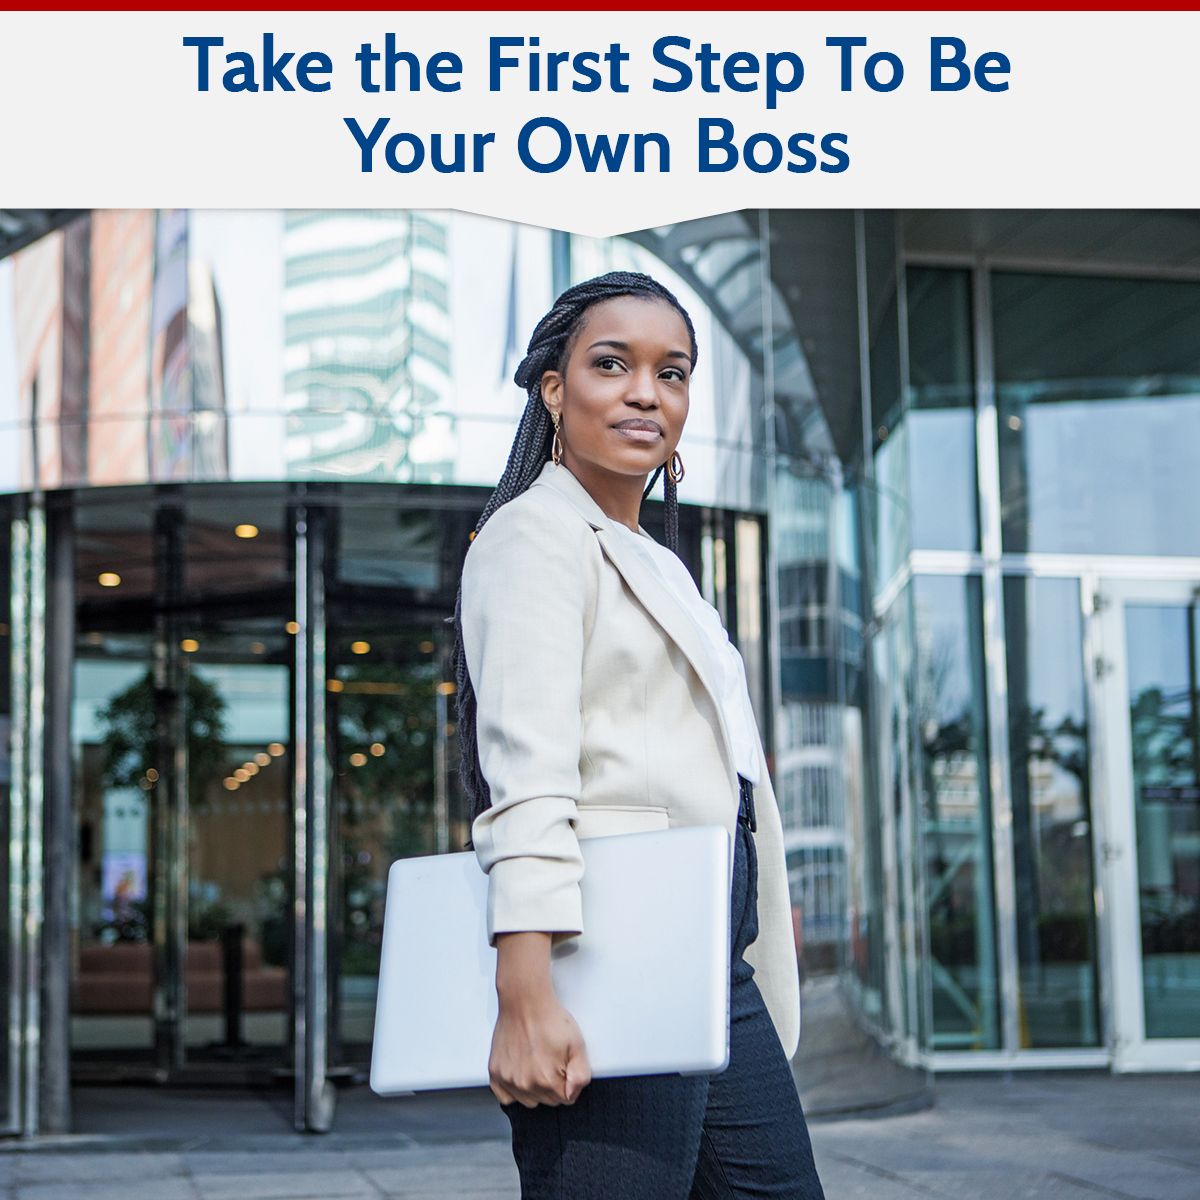 Take the First Step To Be Your Own Boss